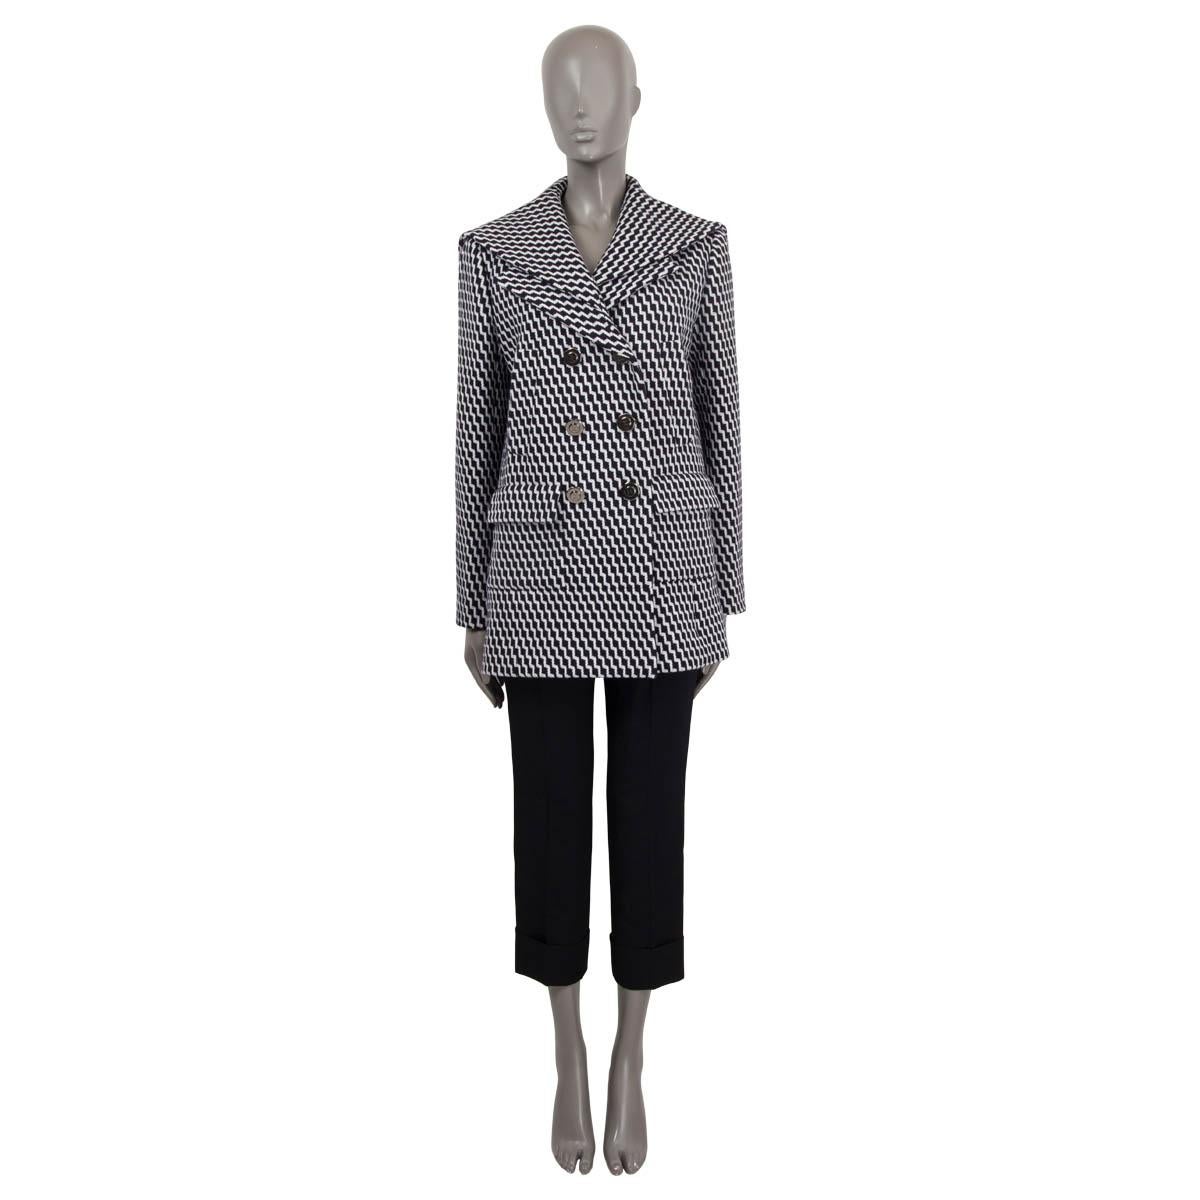 100% authentic Chanel 2018 Paris-Hamburg zig-zag peacoat in navy and off-white wool (98%) and elastane (2%). Features a sailor flap collar and buttoned cuffs. Has two slit pockets and two flap pockets on the front. Opens with silver-tone 'CC'